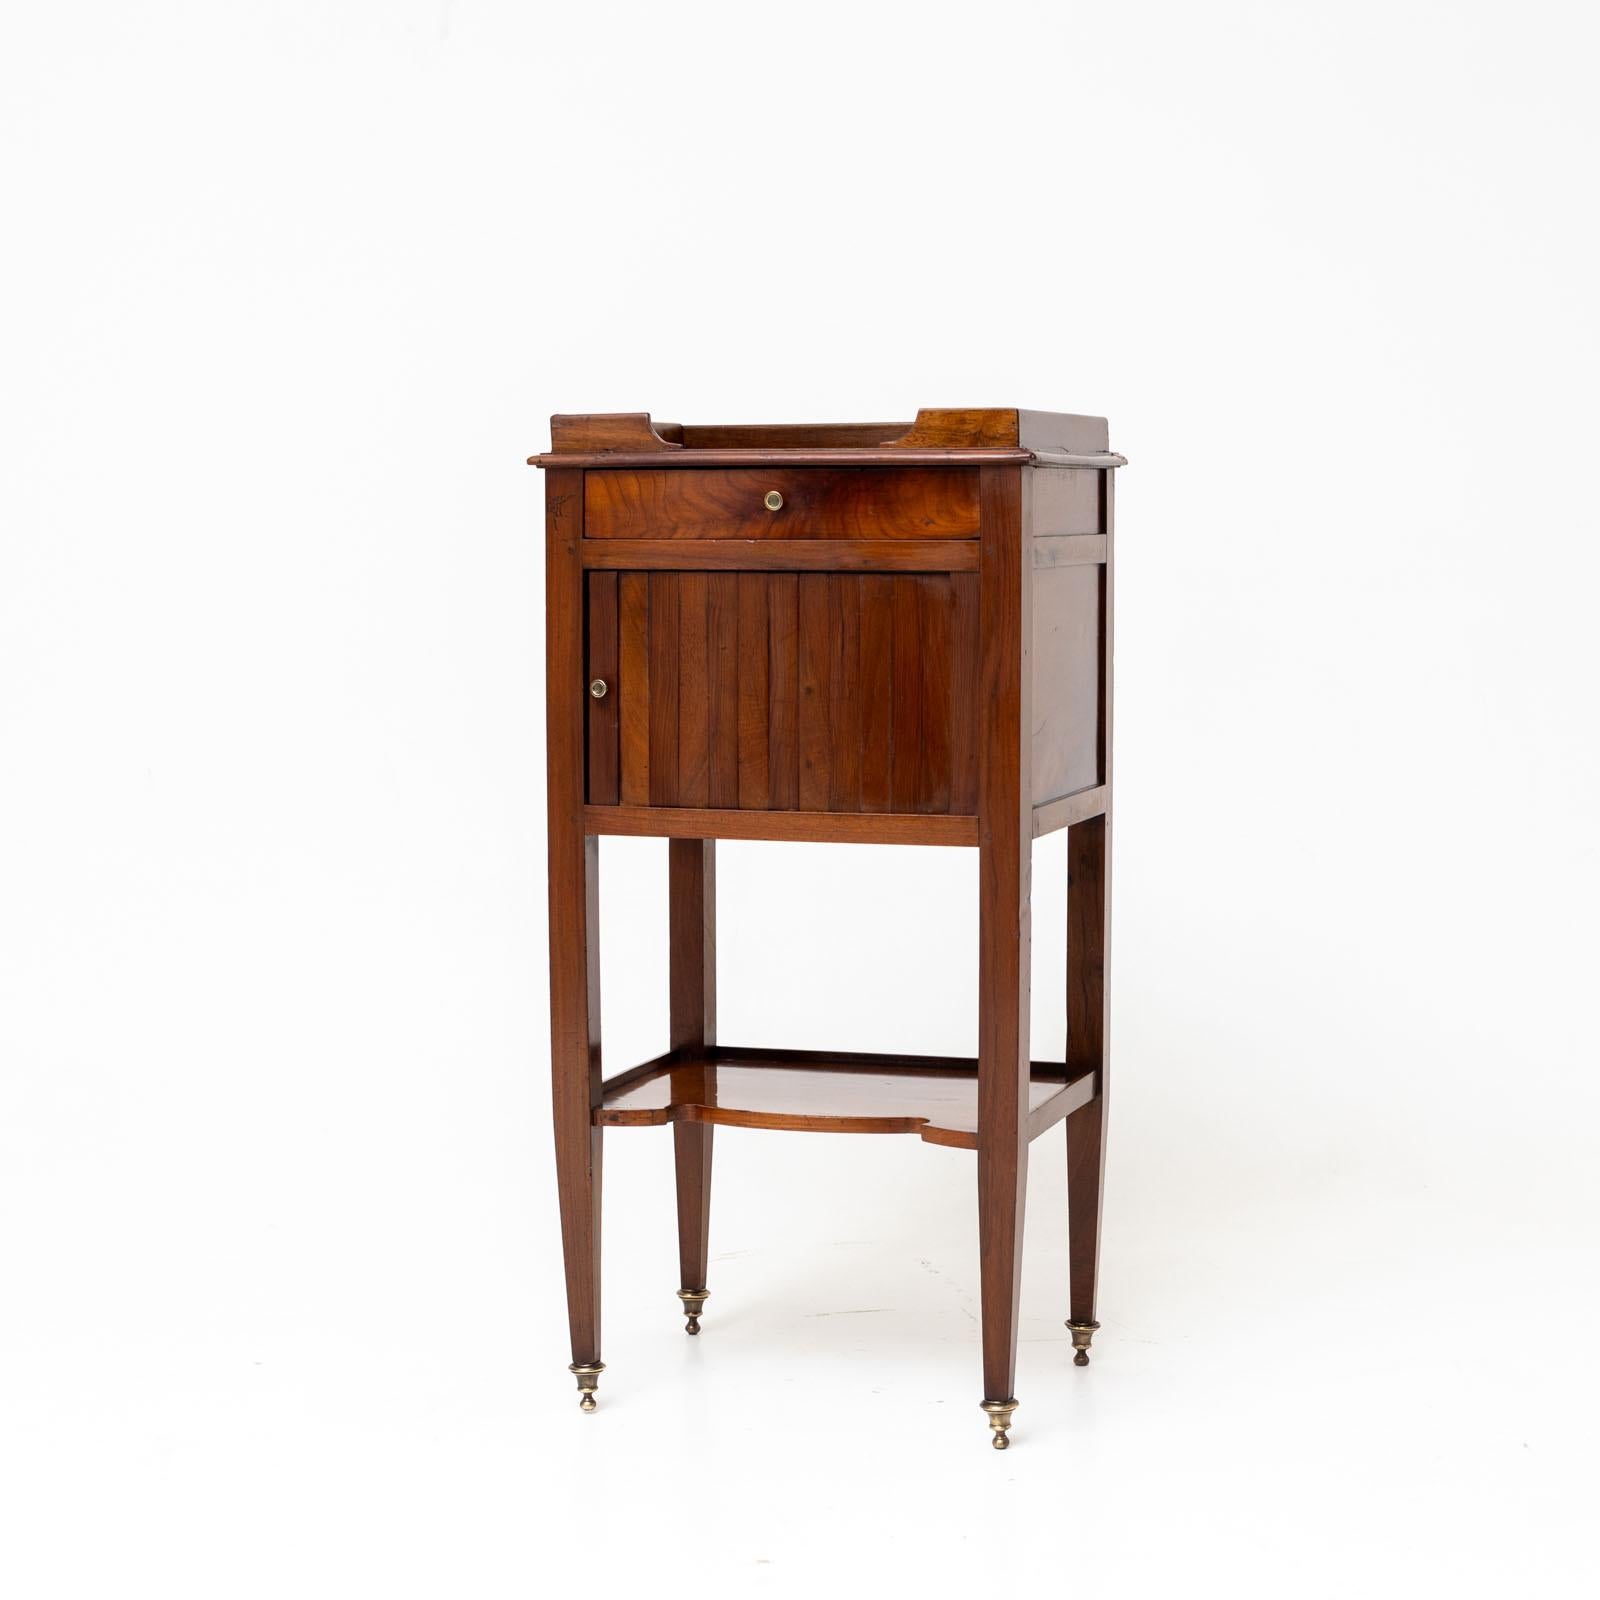 Small Biedermeier bedside cabinet with tambour door, small drawer and one shelf. The cabinet stands on brass sabots and the top is surrounded by a small bar. The bedside cabinet is veneered in walnut and polished by hand.